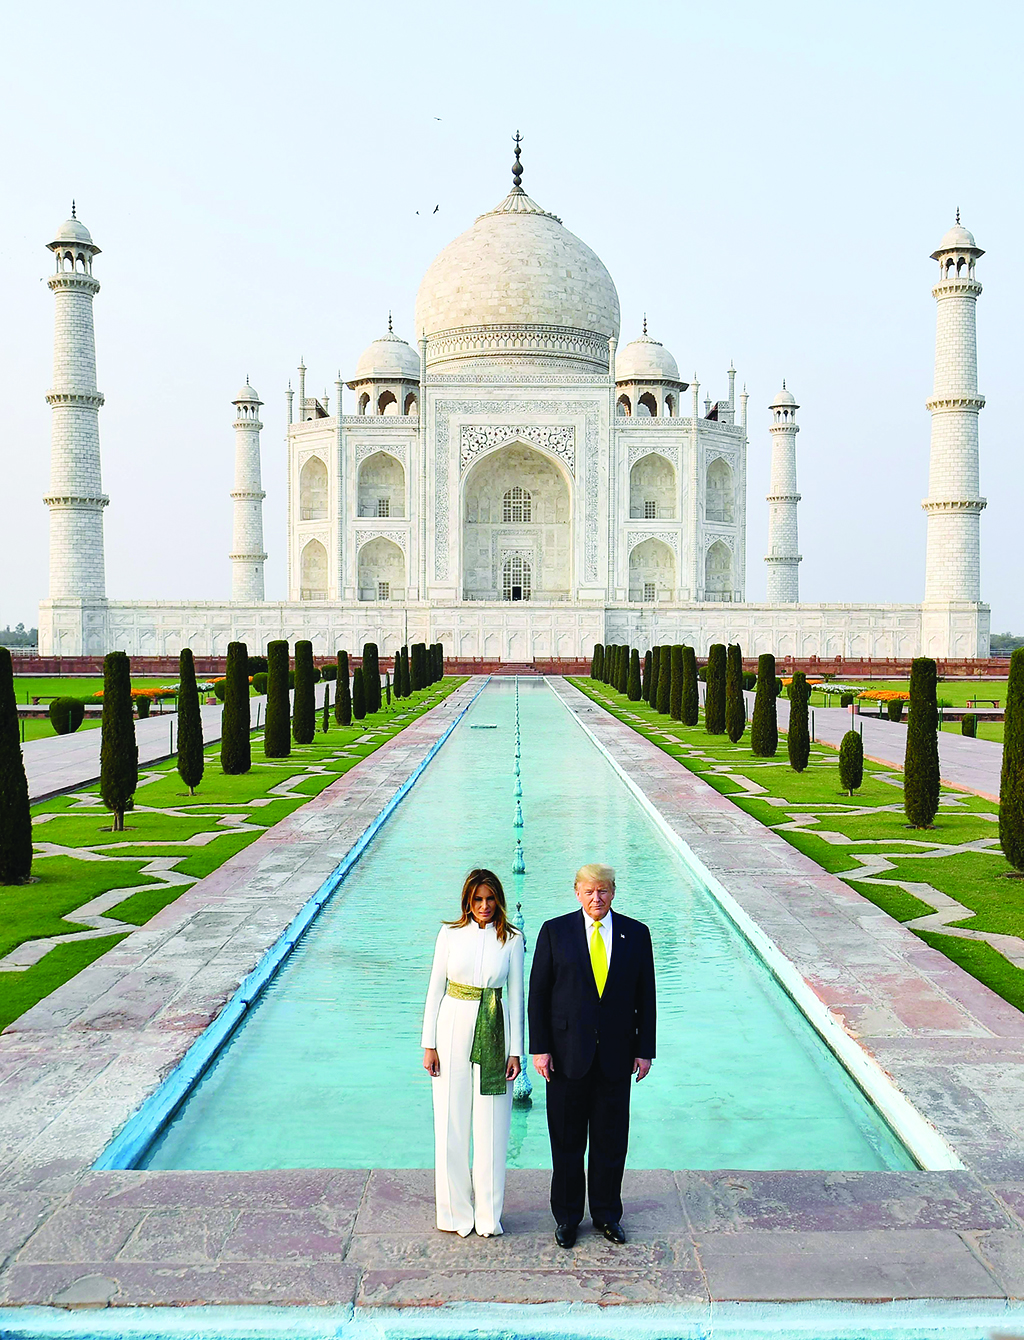 US President Donald Trump and First Lady Melania Trump pose as they visit the Taj Mahal in Agra on February 24, 2020. (Photo by Mandel NGAN / AFP)